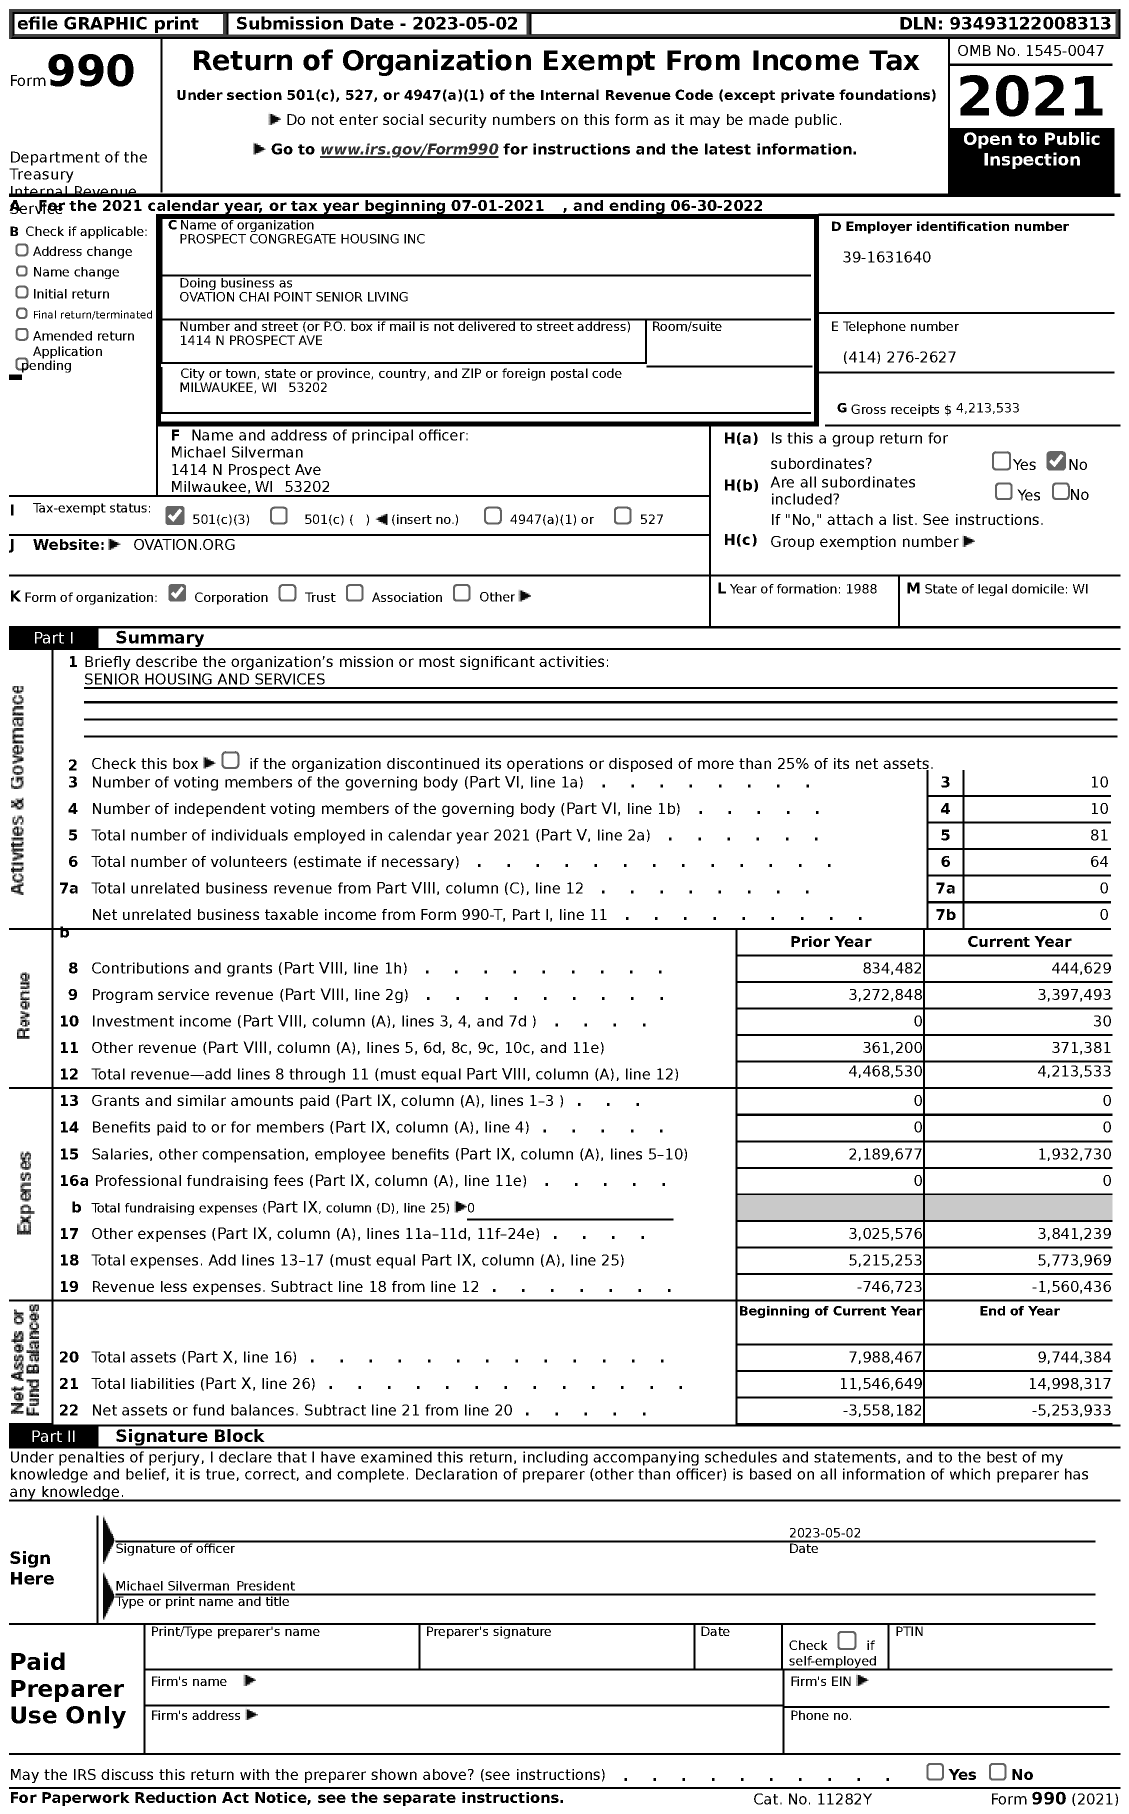 Image of first page of 2021 Form 990 for Ovation Chai Point Senior Living